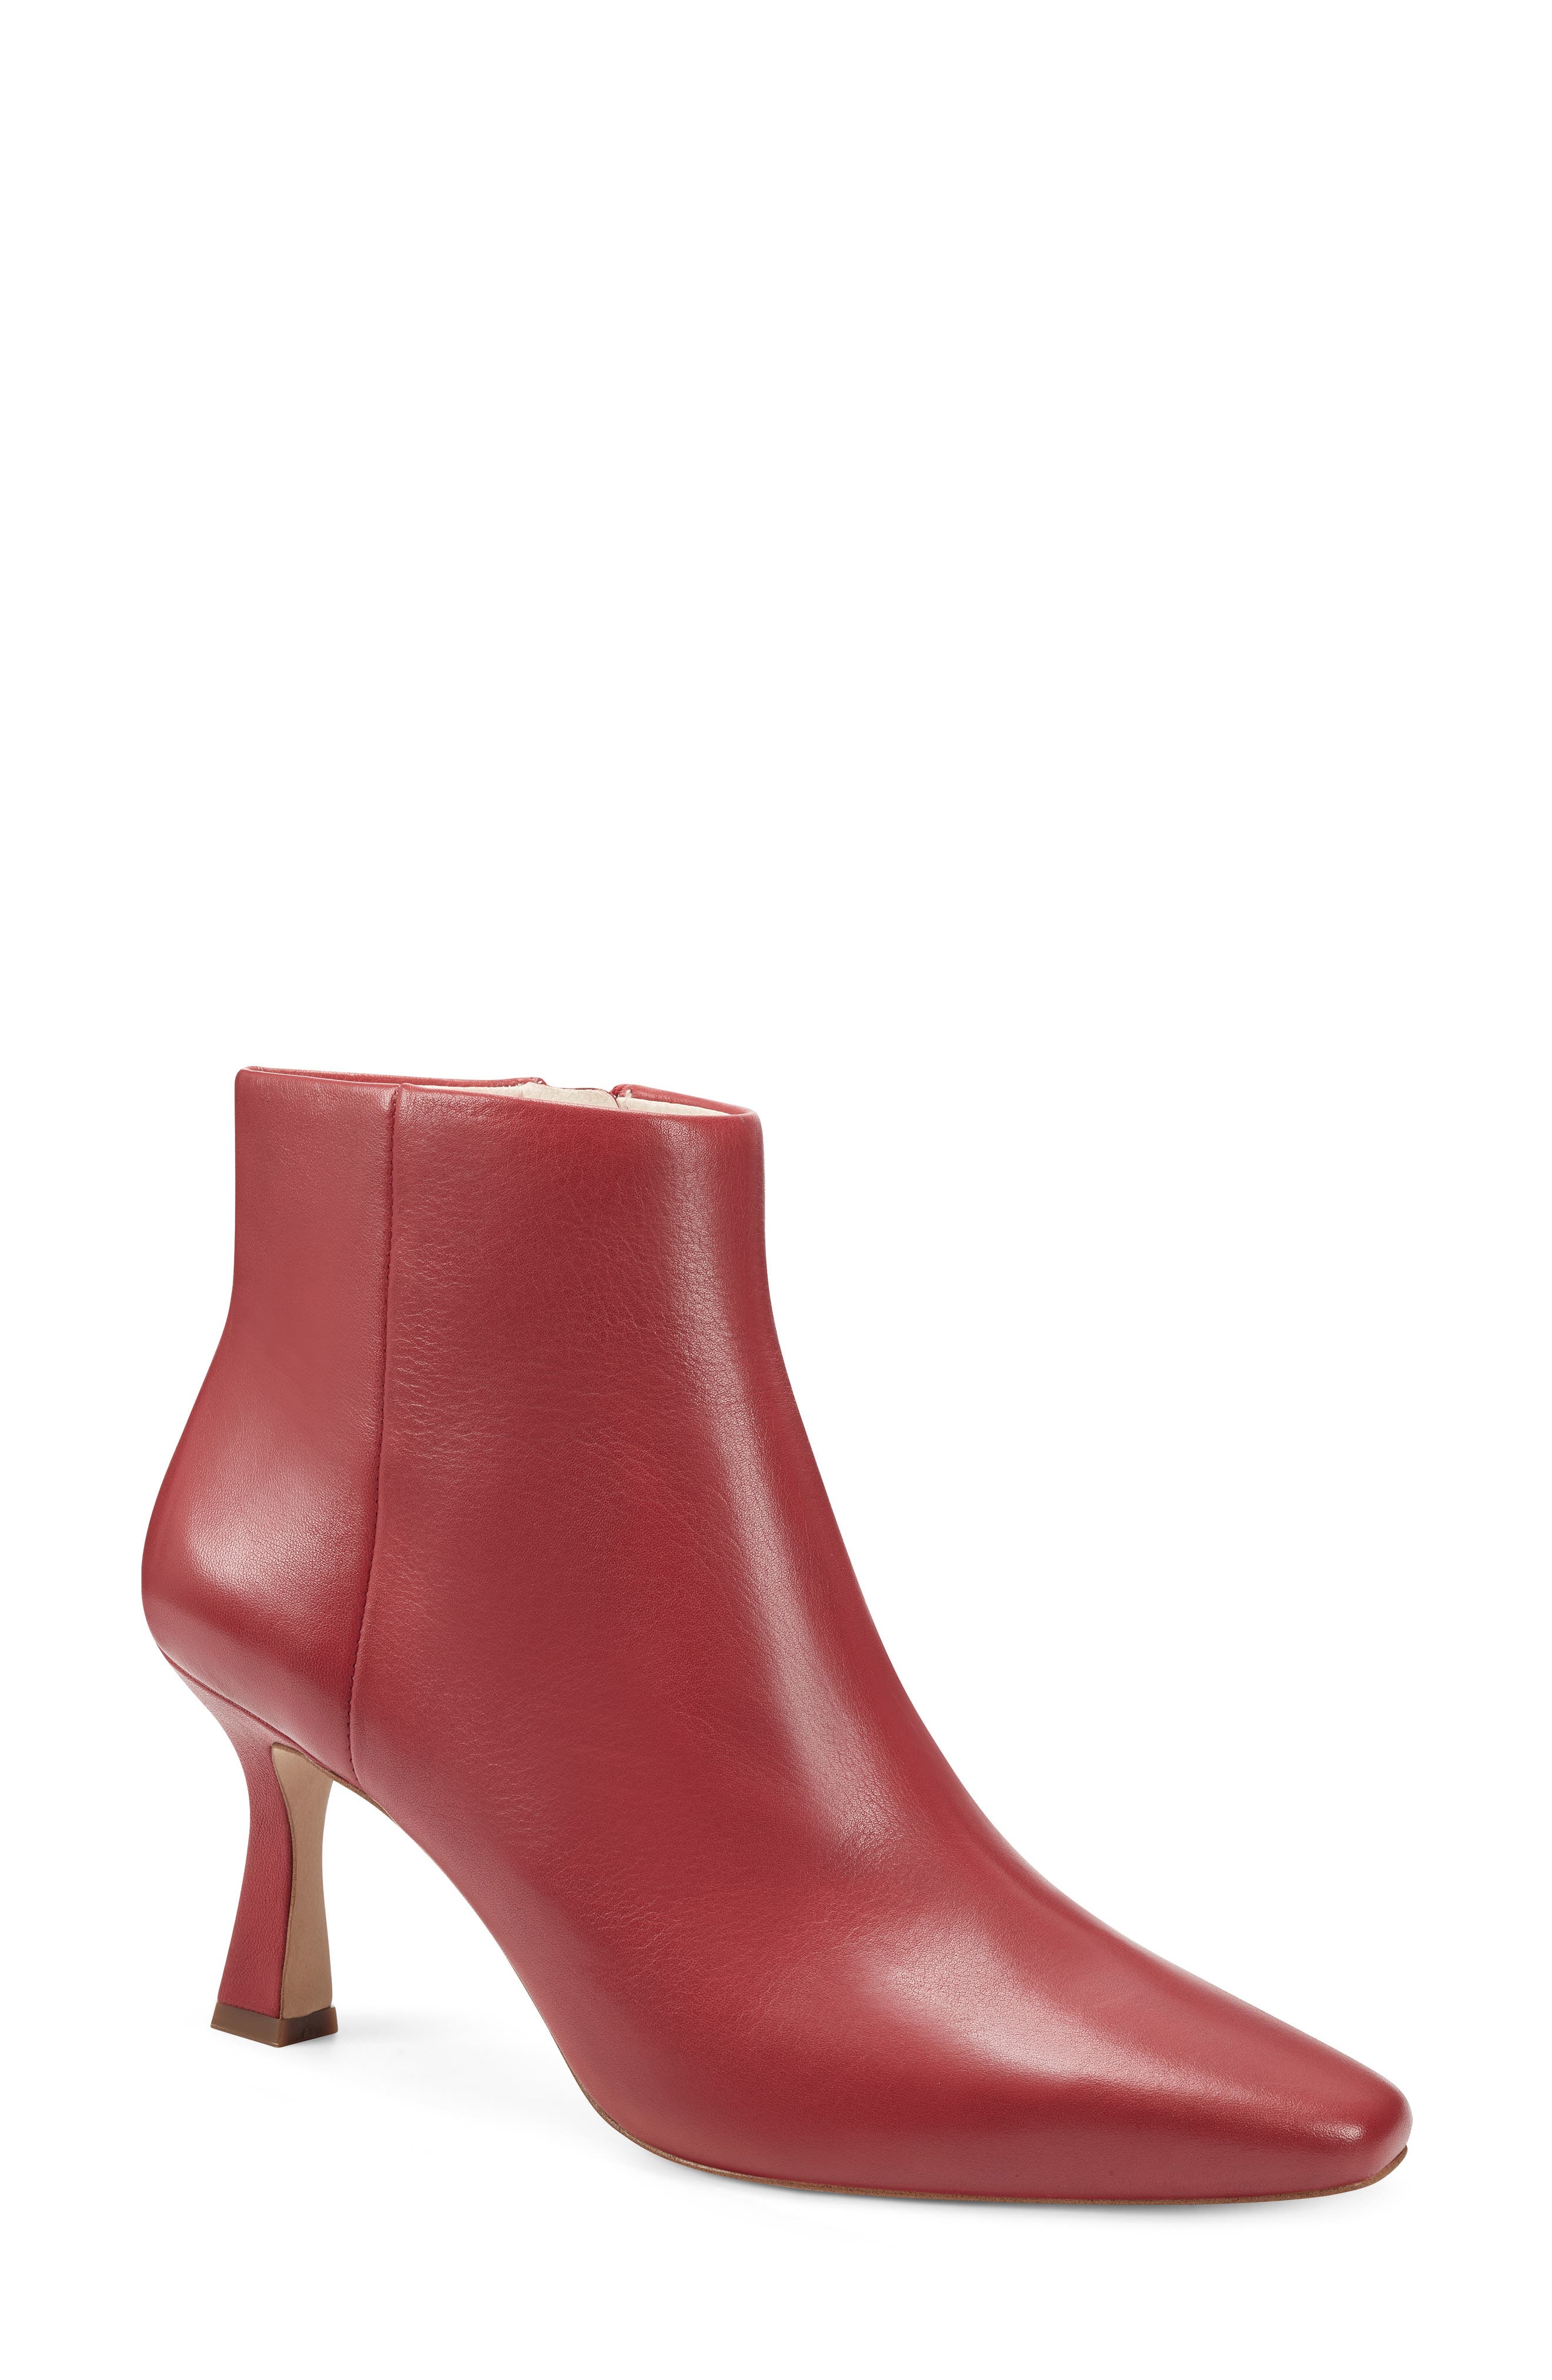 red leather womens boots